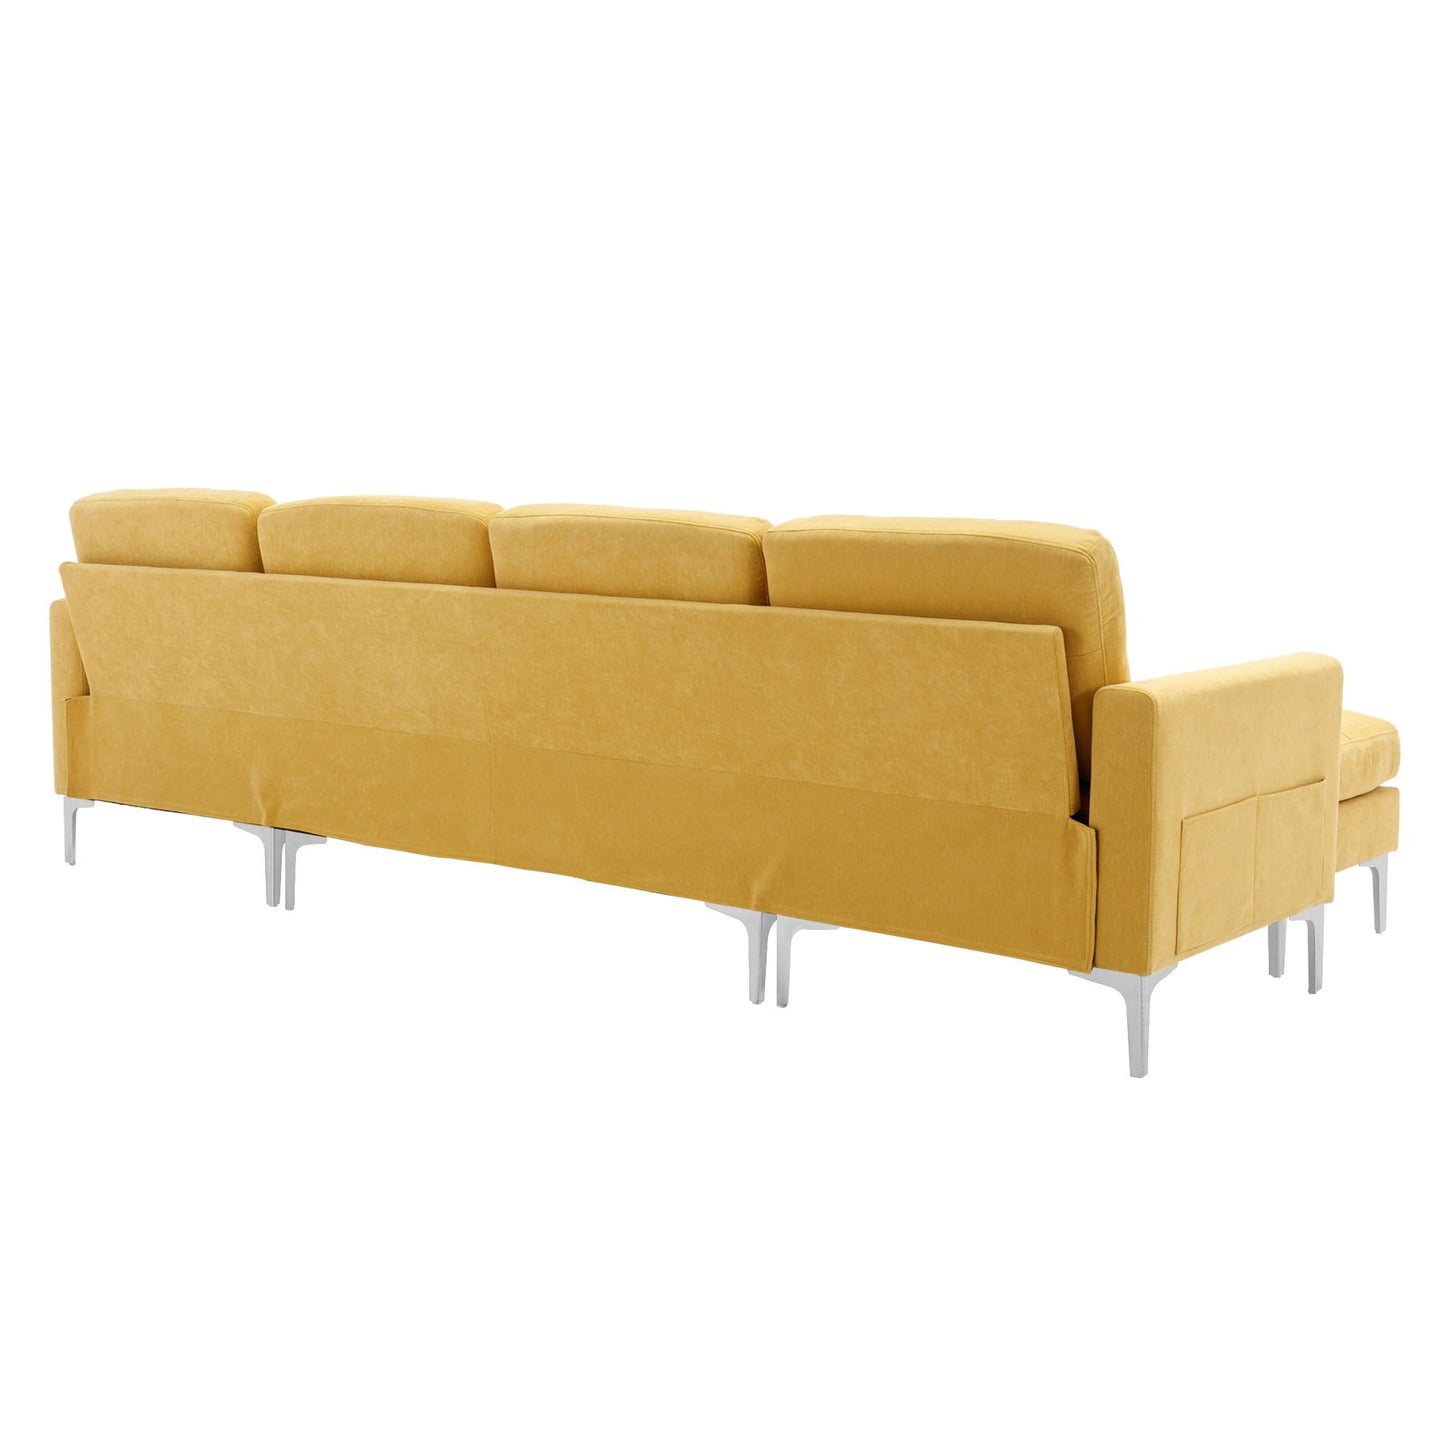 110 L-Shaped Convertible Sectional Sofa Set with Moveable Ottoman in Yellow for Home and Office